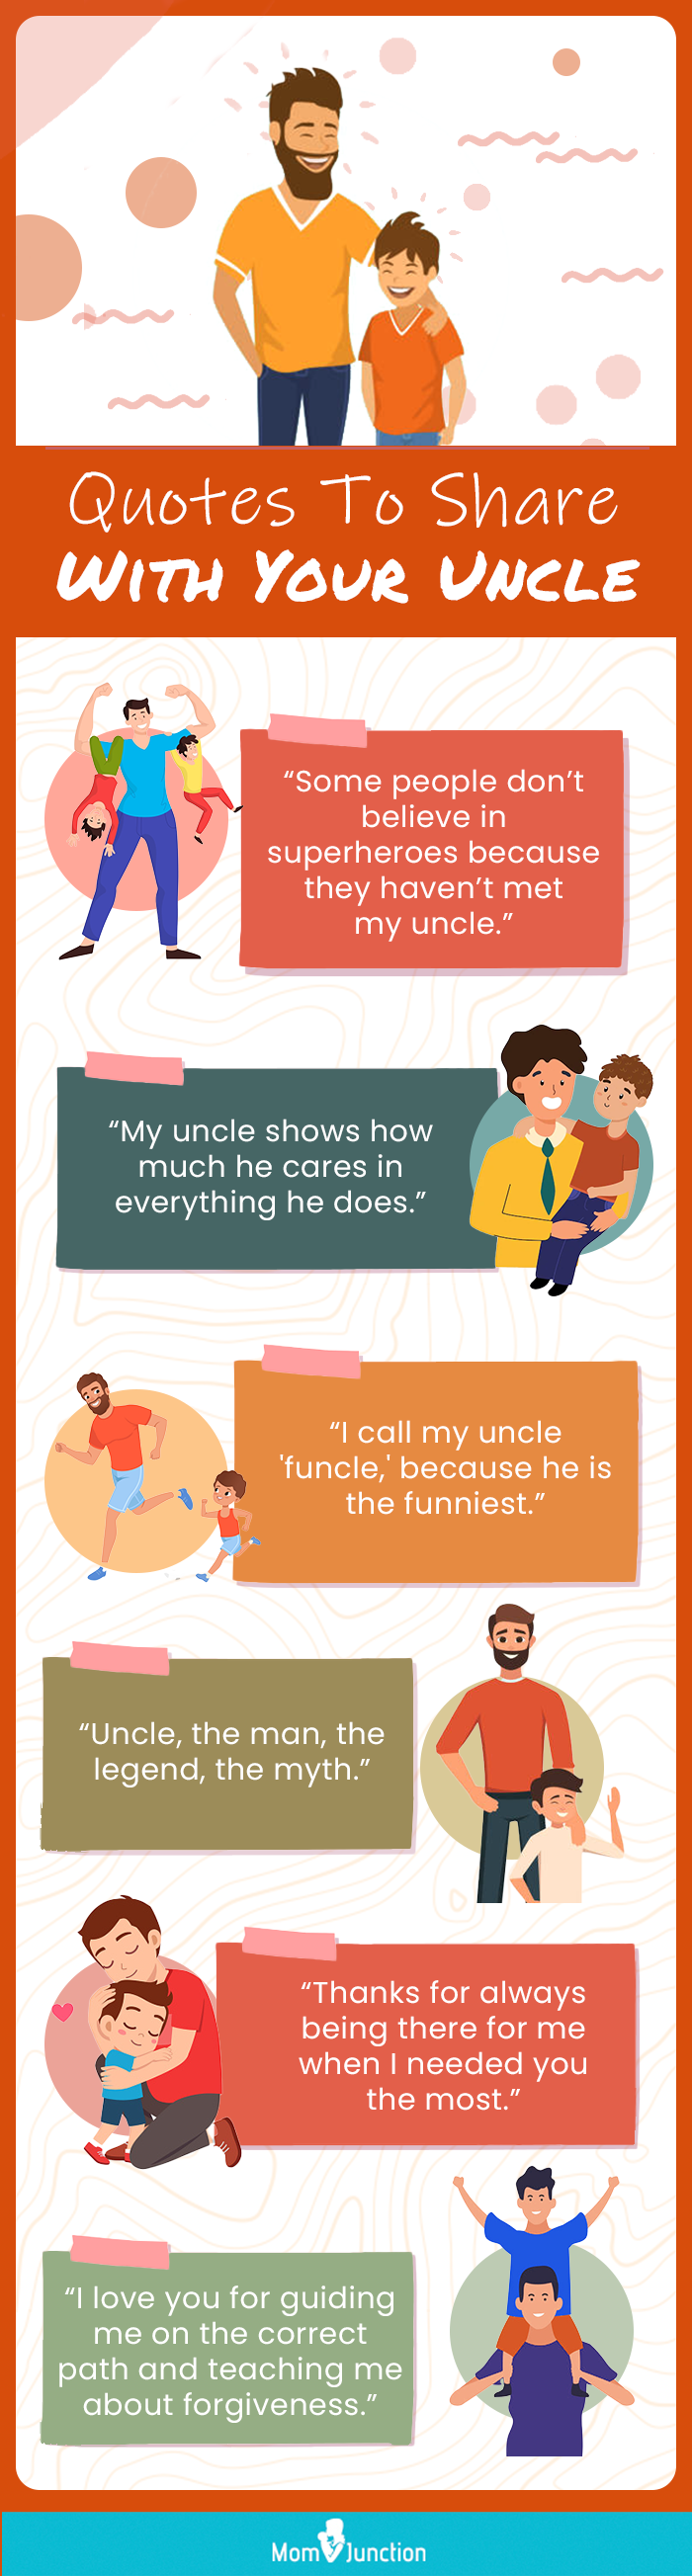 quotes to share with your uncle (infographic)